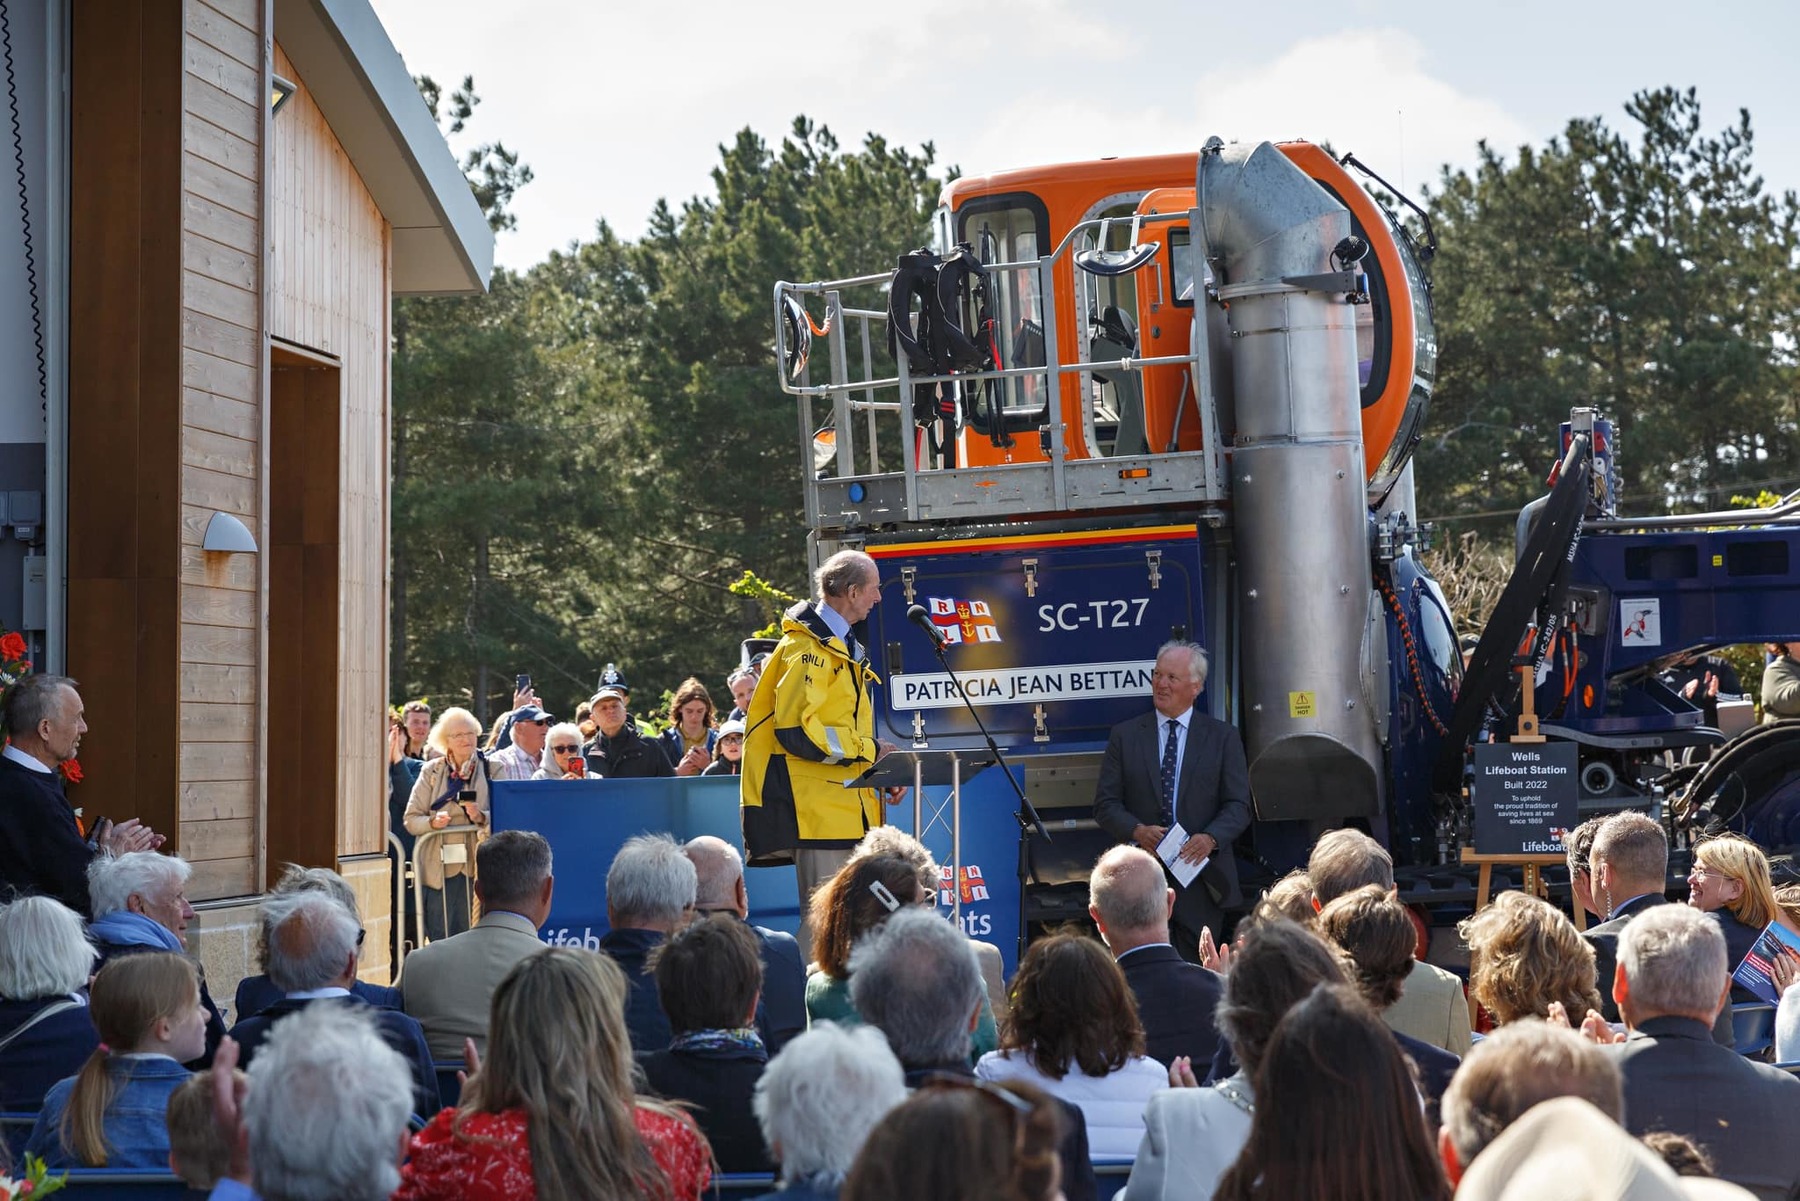 HRH The Duke of Kent naming the new lifeboat